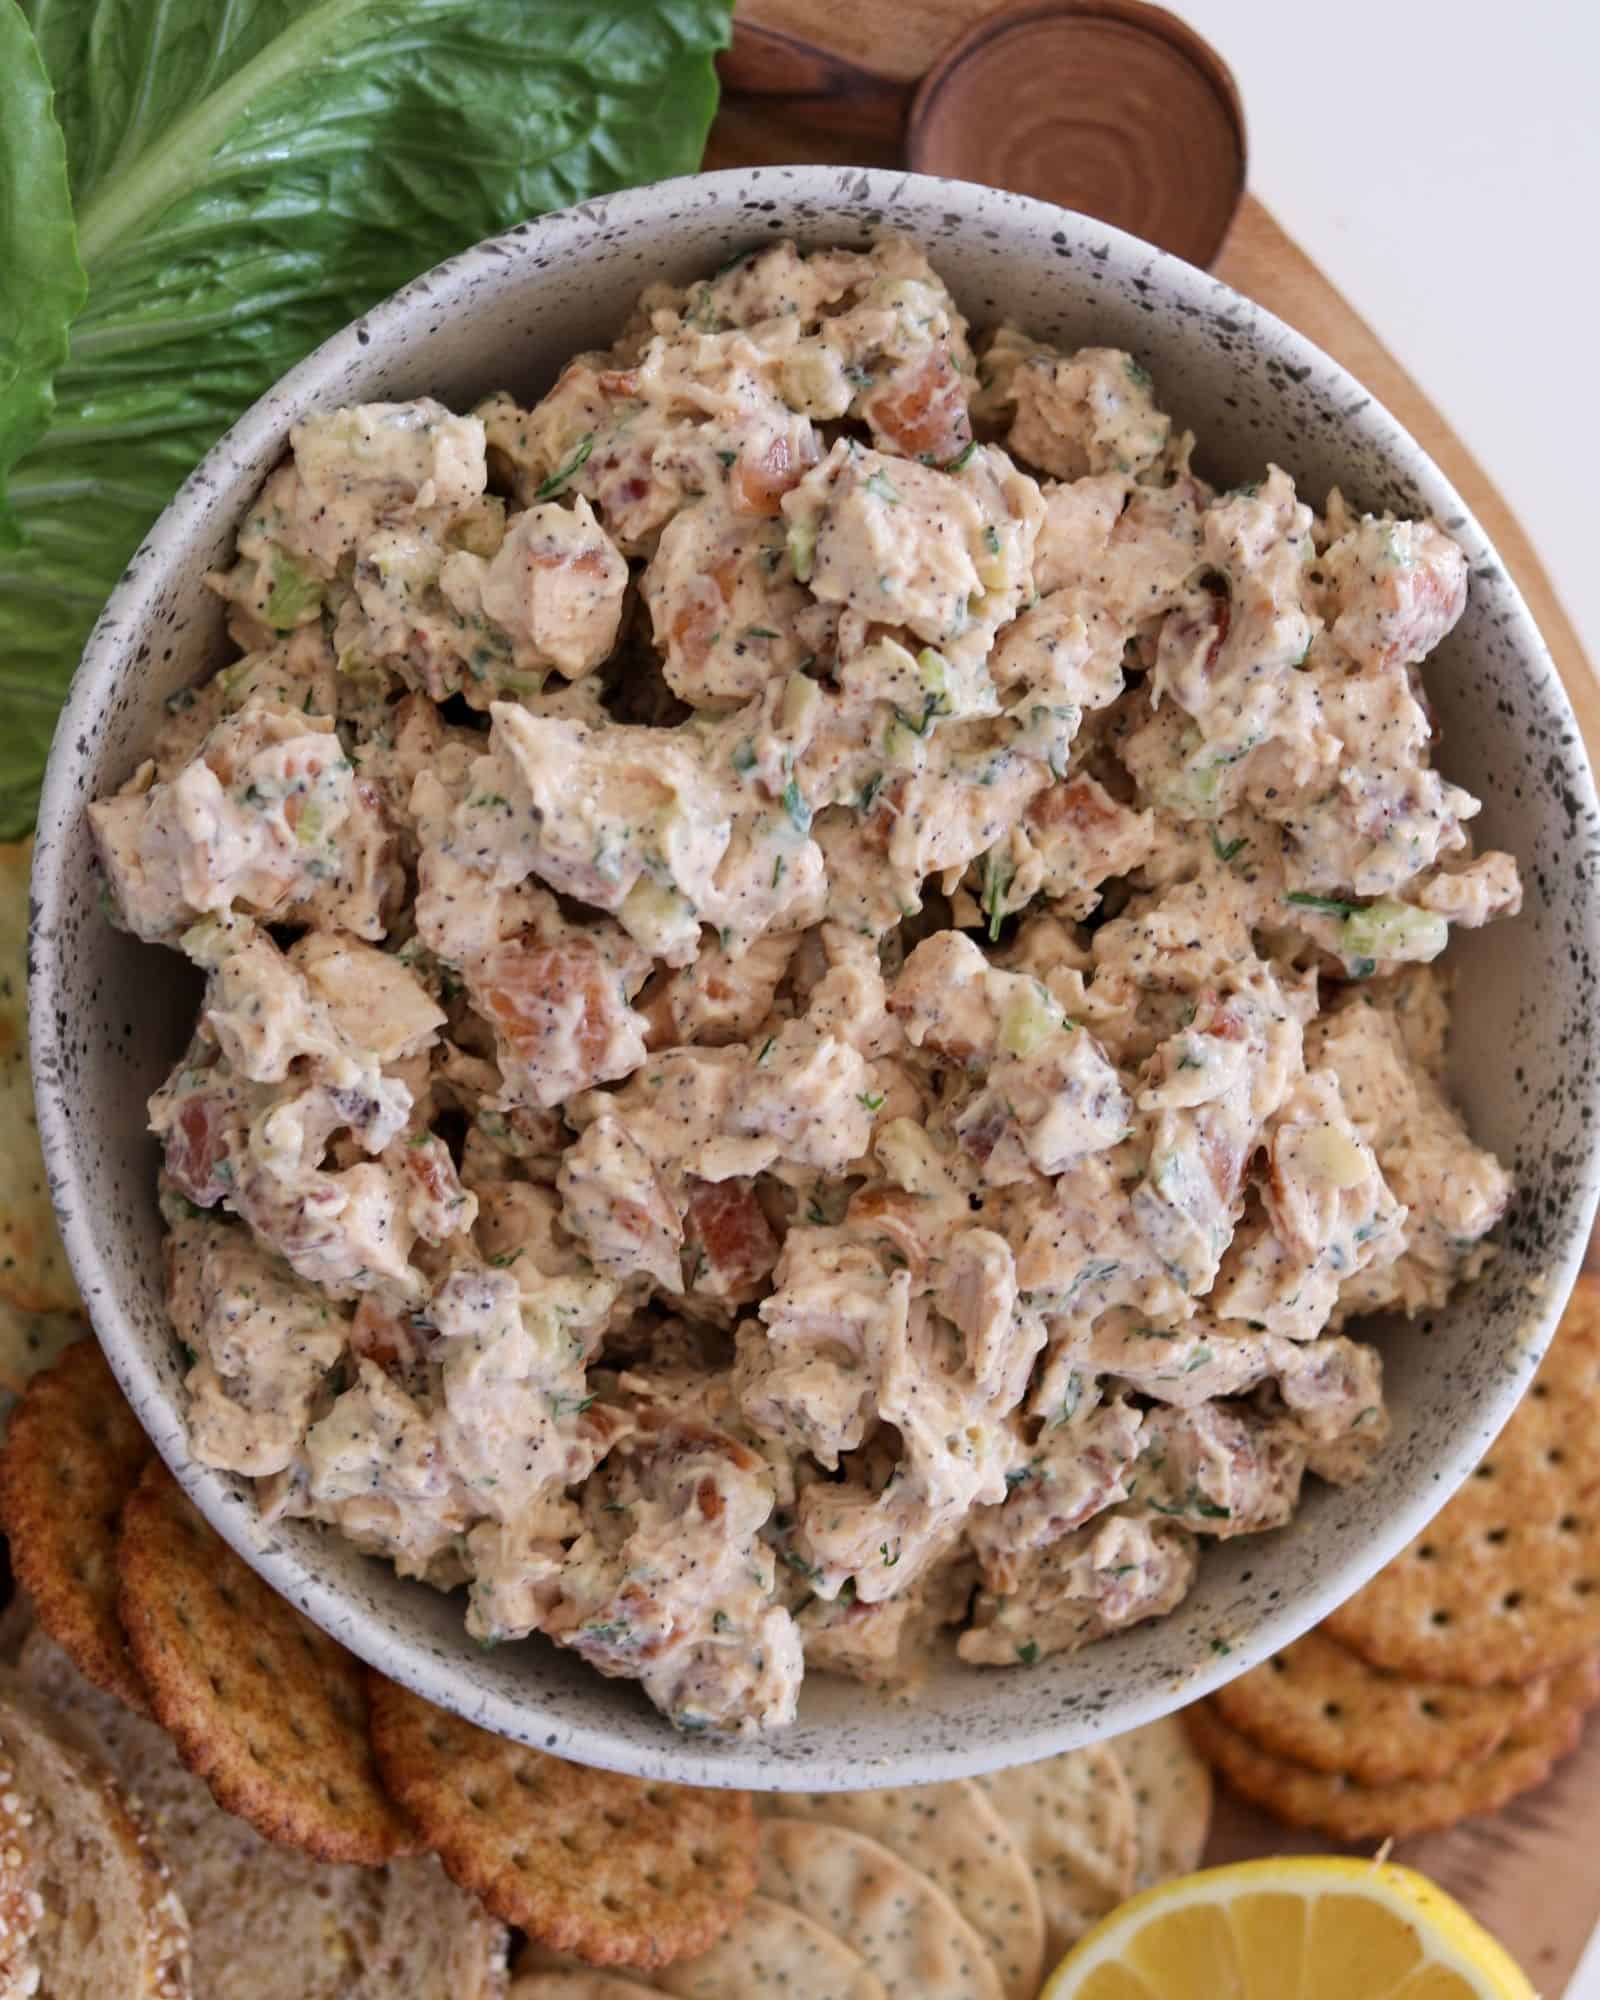 smoked chicken salad in a bowl served with crackers, lettuce, and bread